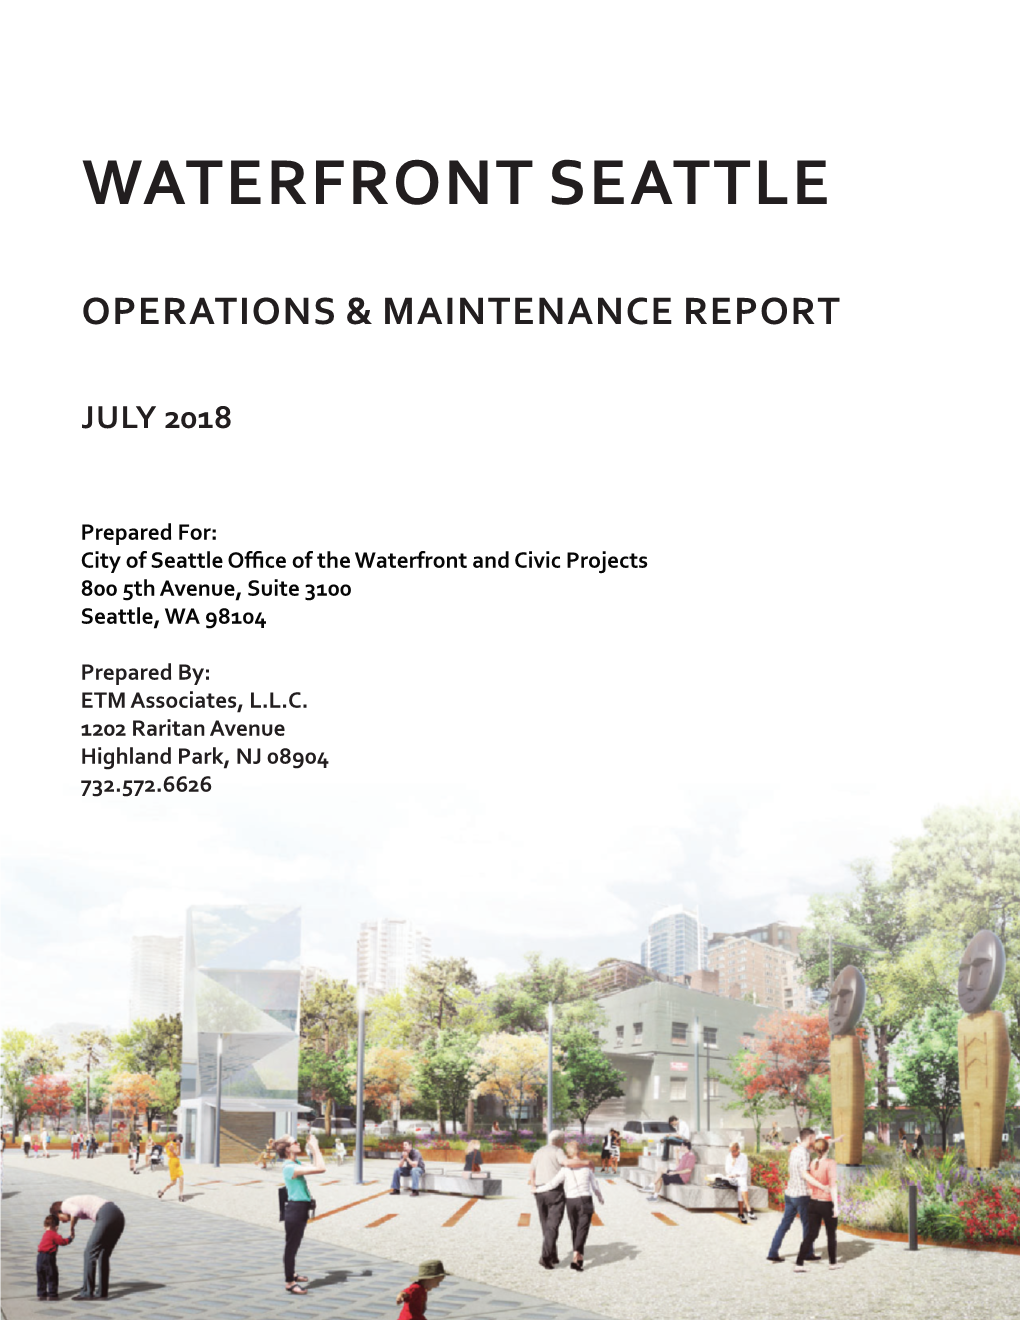 Waterfront Seattle Operations and Maintenance Report